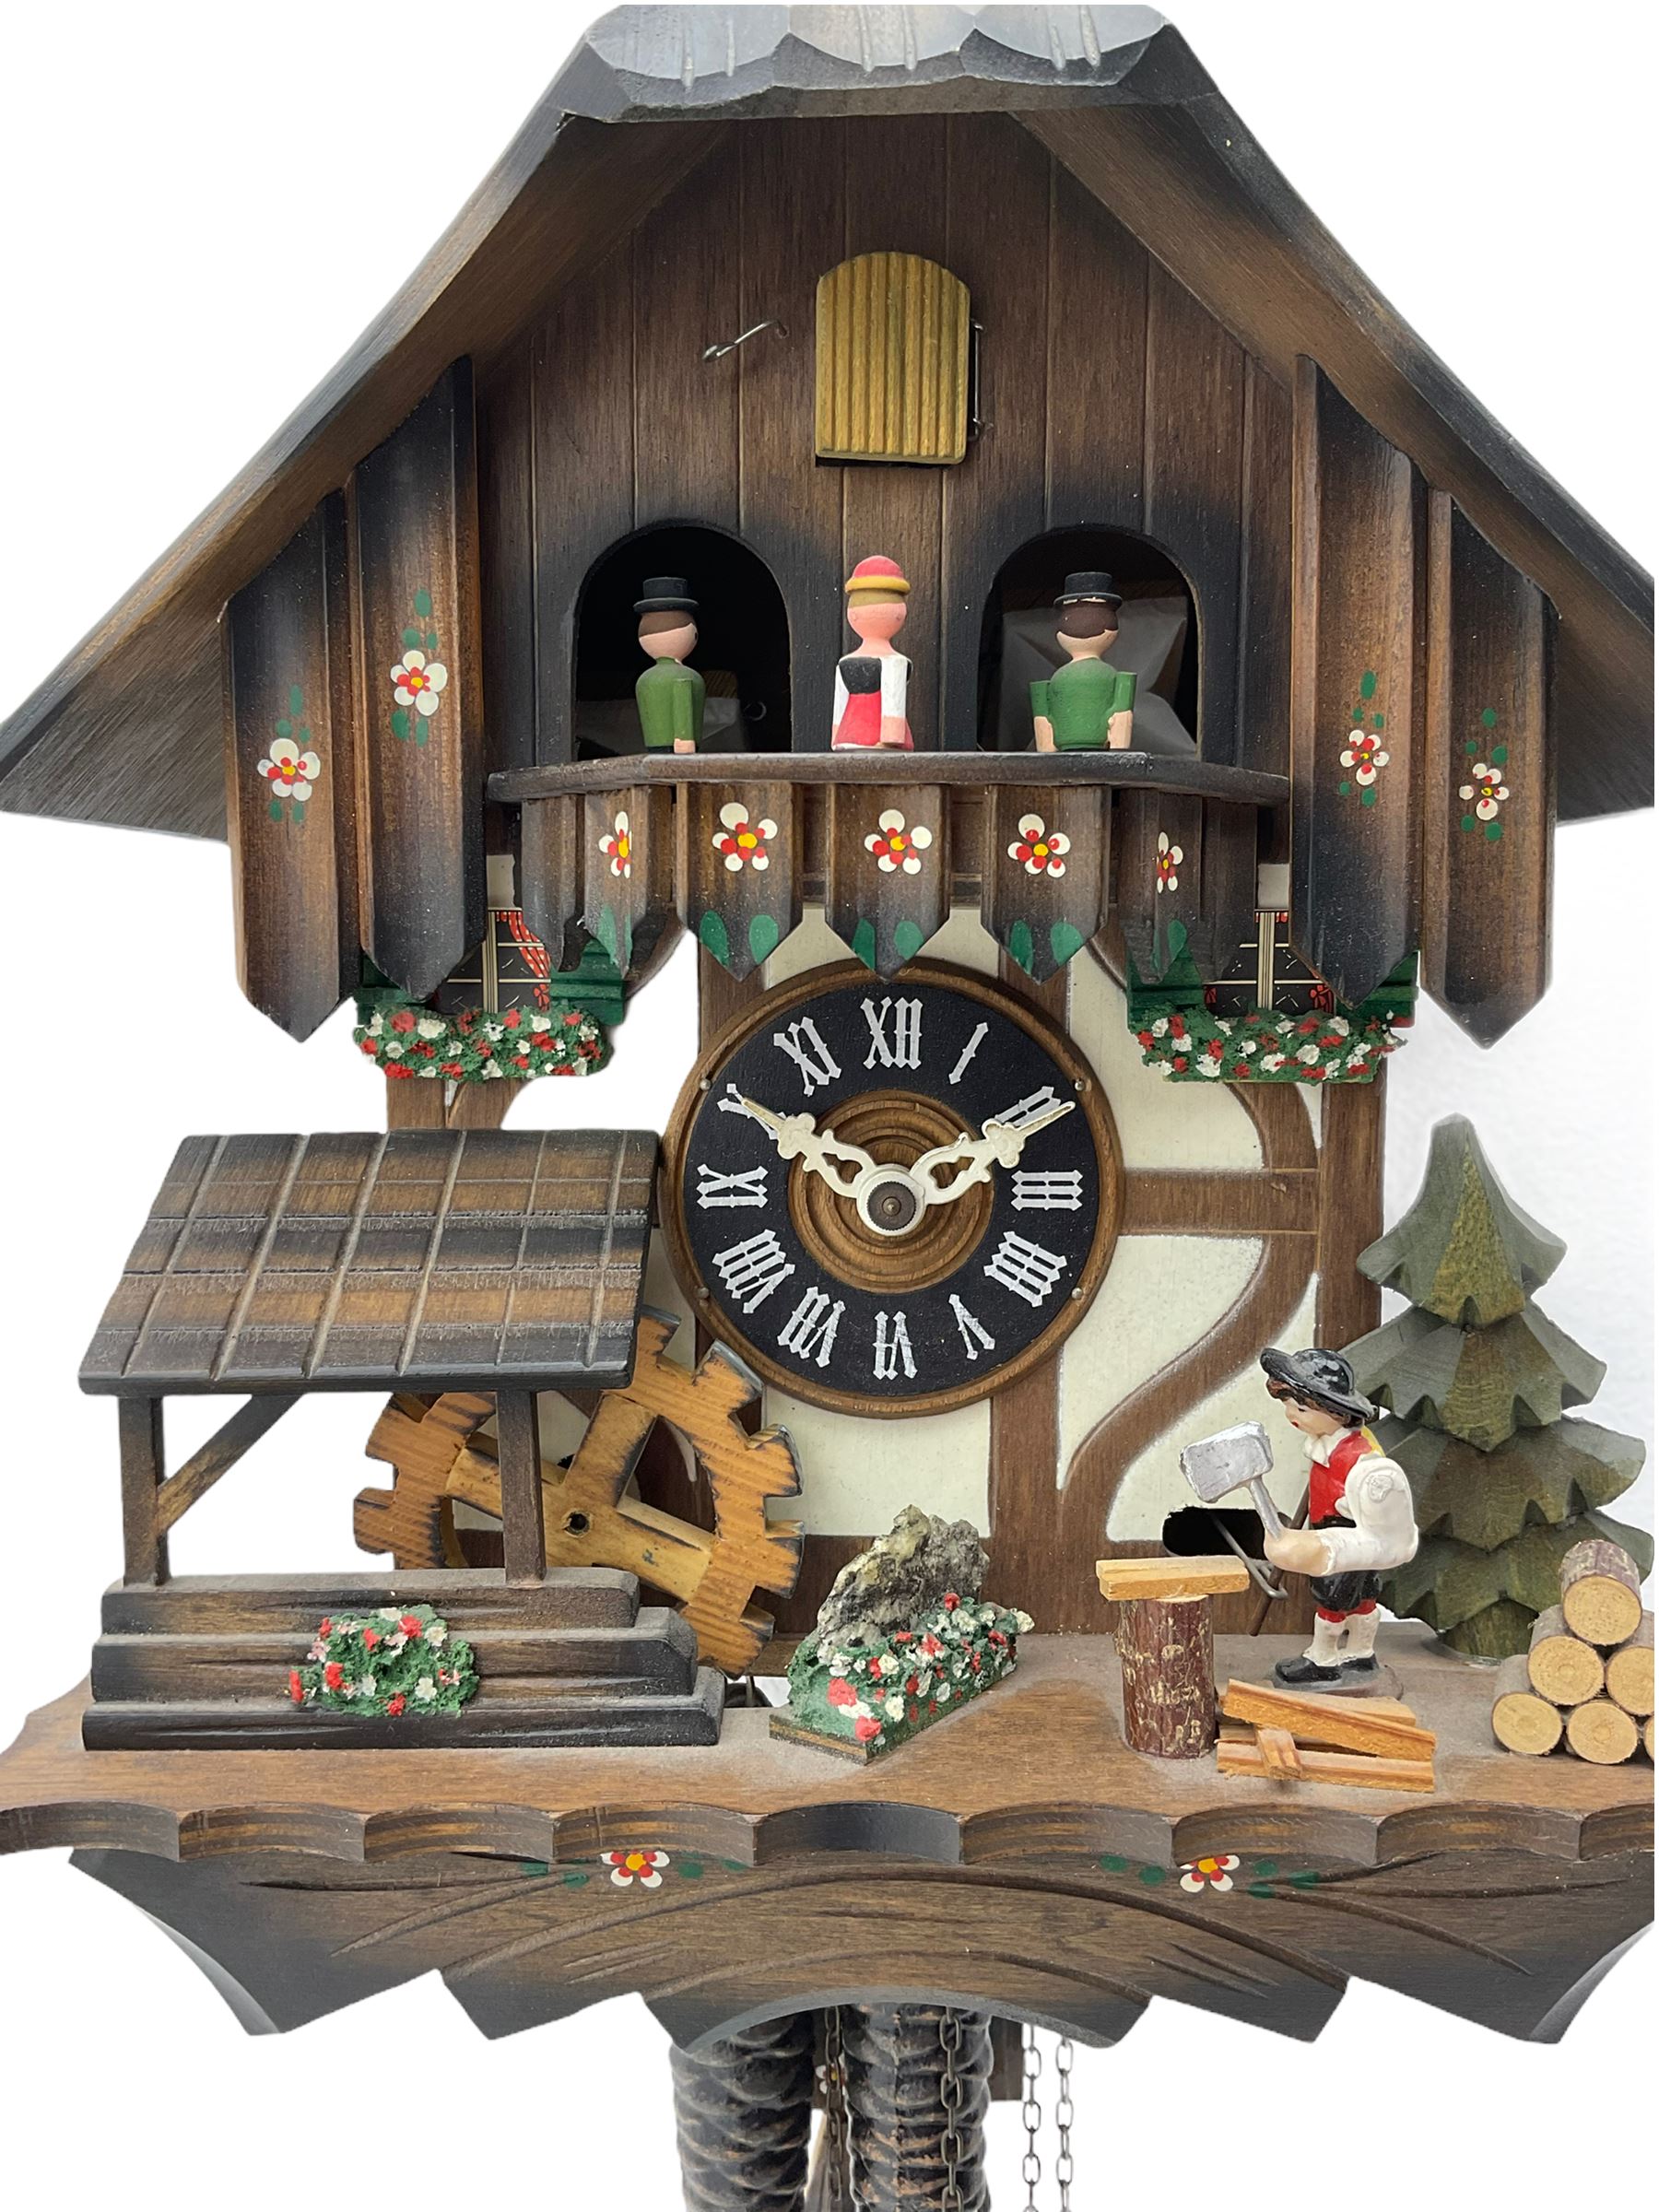 A 20th century West German 30-hour Automaton musical cuckoo clock with a Swiss musical movement play - Image 3 of 3